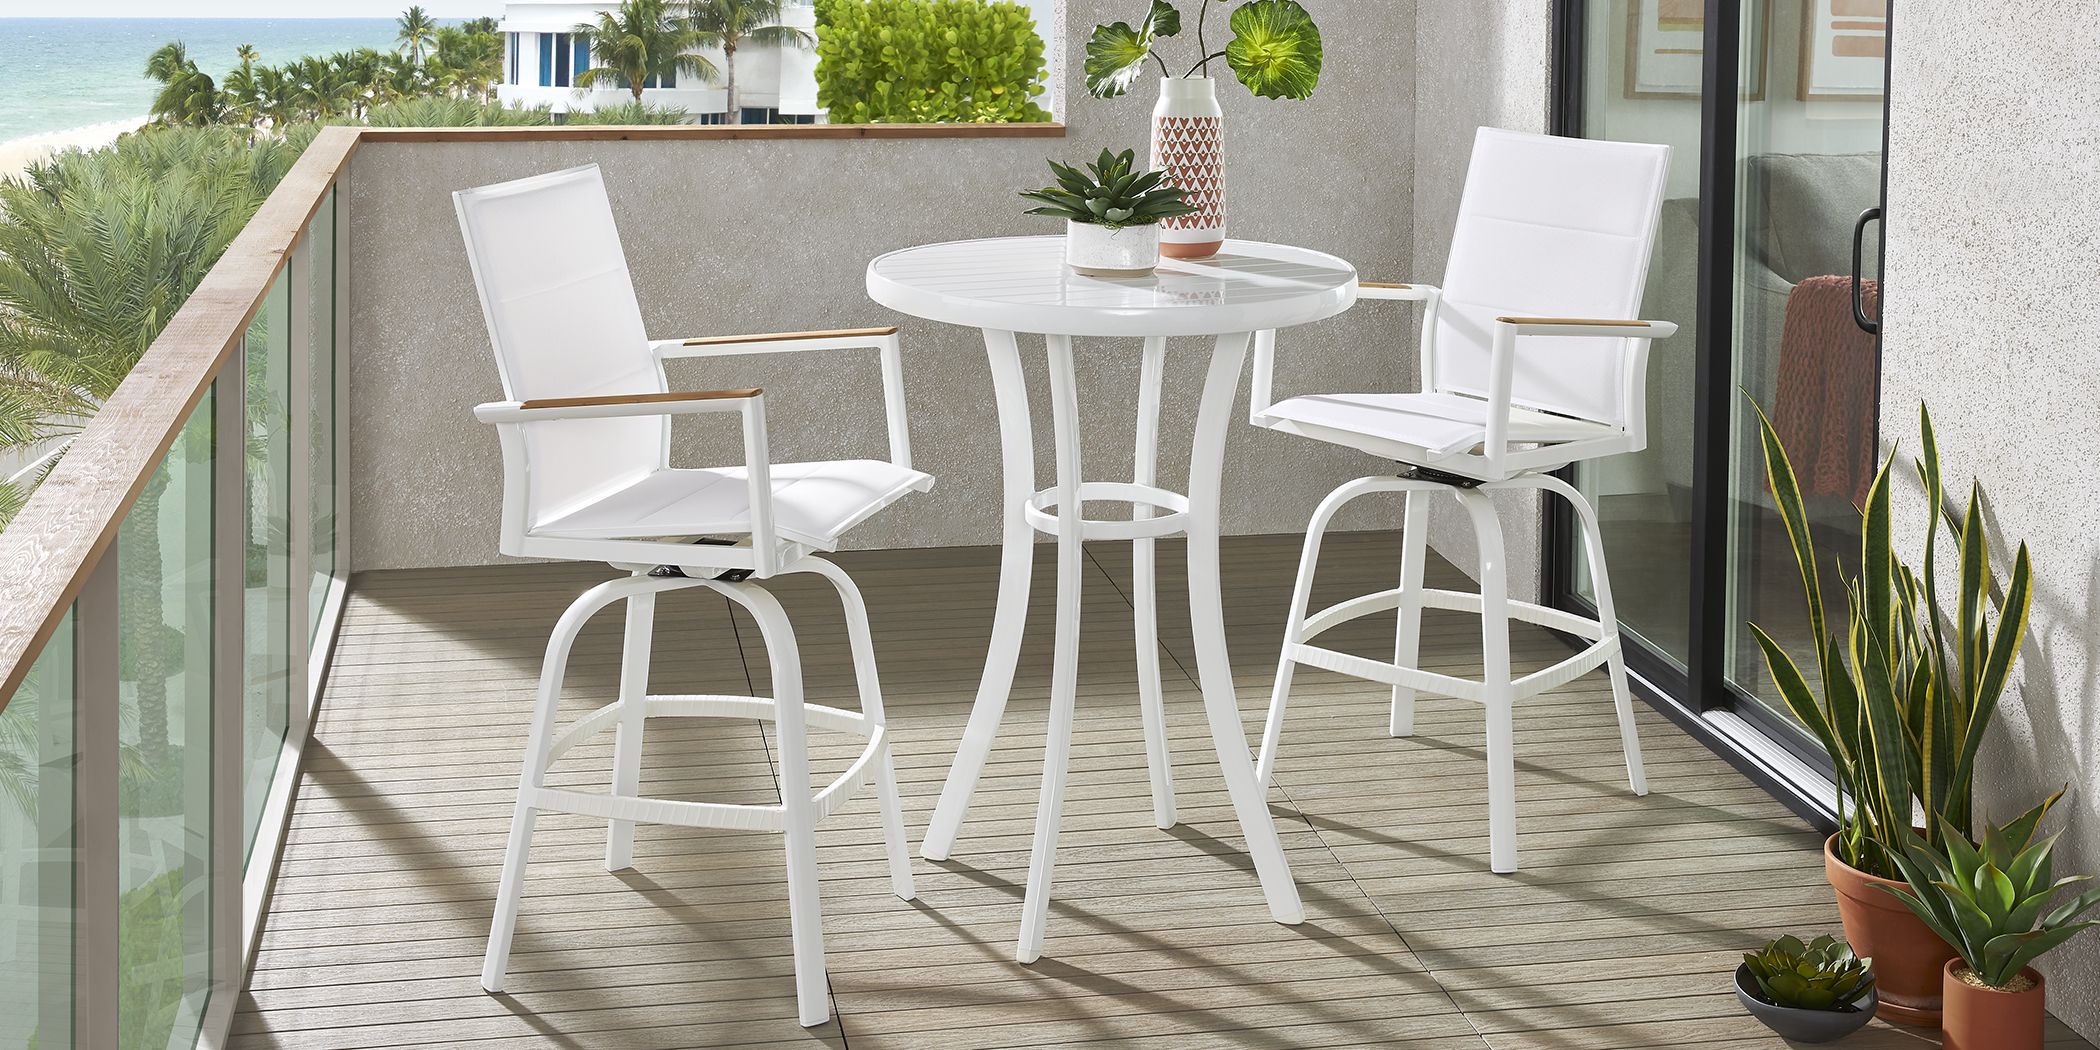 solana white 3 pc outdoor bar height dining set with swivel barstools